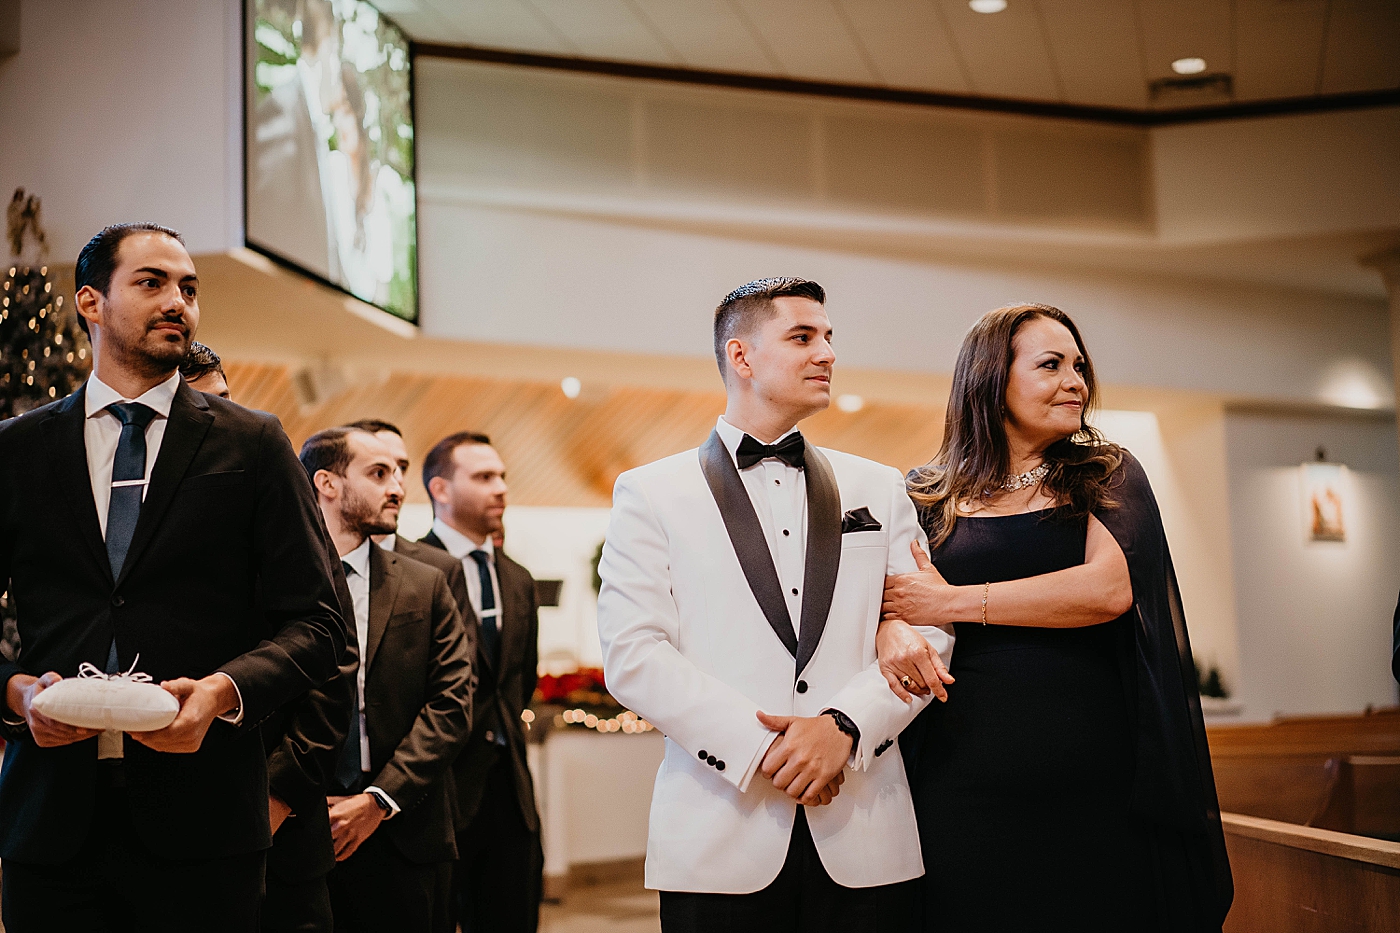 Groom awaiting Bride at alter Lavan Venue Wedding Photography captured by South Florida Wedding Photographer Krystal Capone Photography